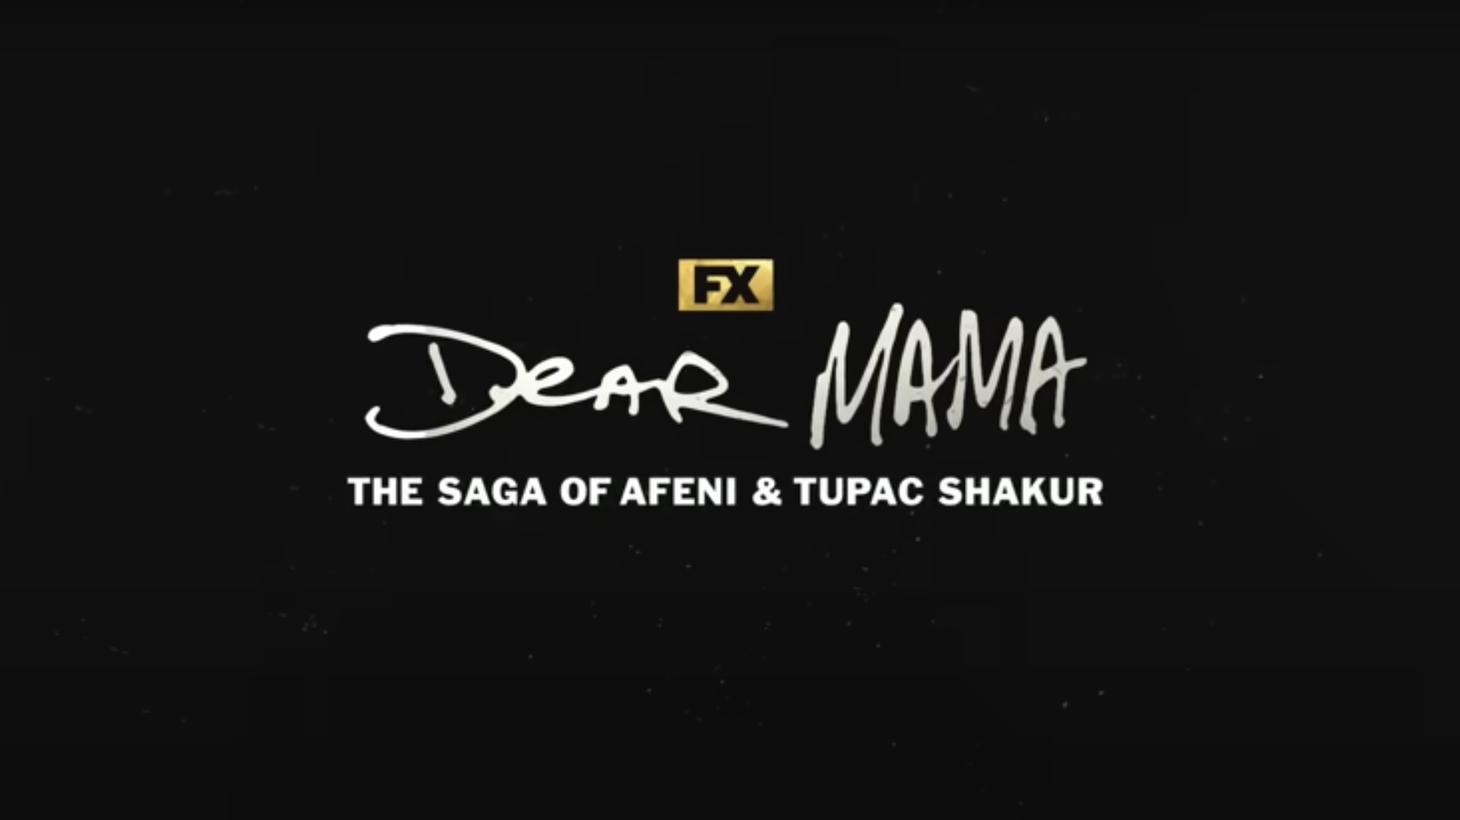 Official Trailer of “Dear Mama: The Saga of Afeni and Tupac Shakur” documentary series on Hulu.